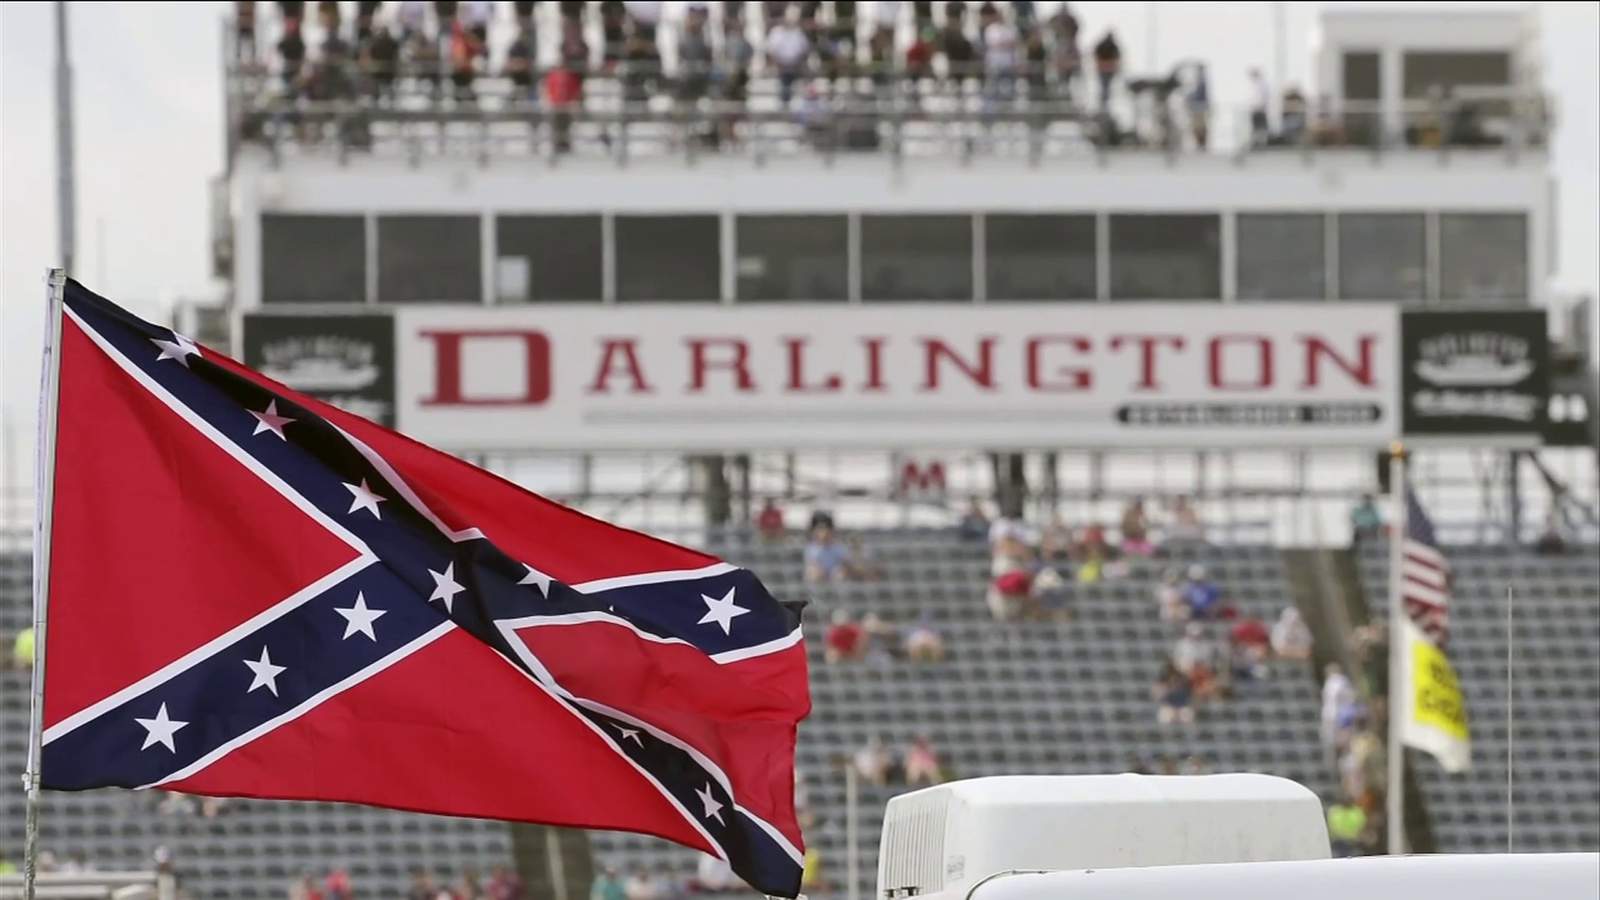 NASCAR bans display of the Confederate flag at its events and properties